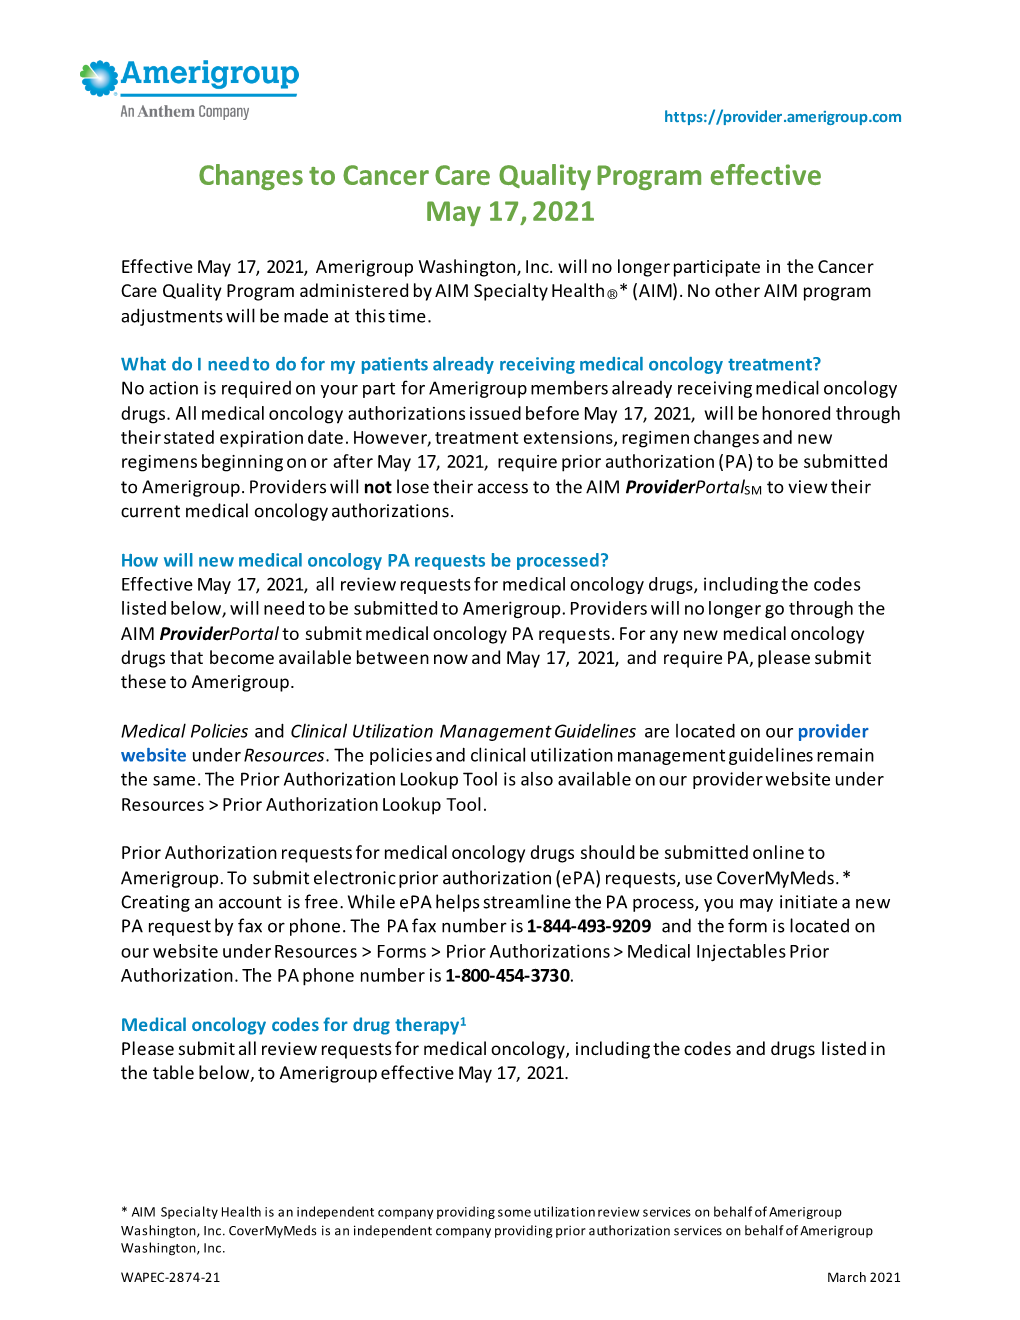 Changes to Cancer Care Quality Program Effective May 17, 2021